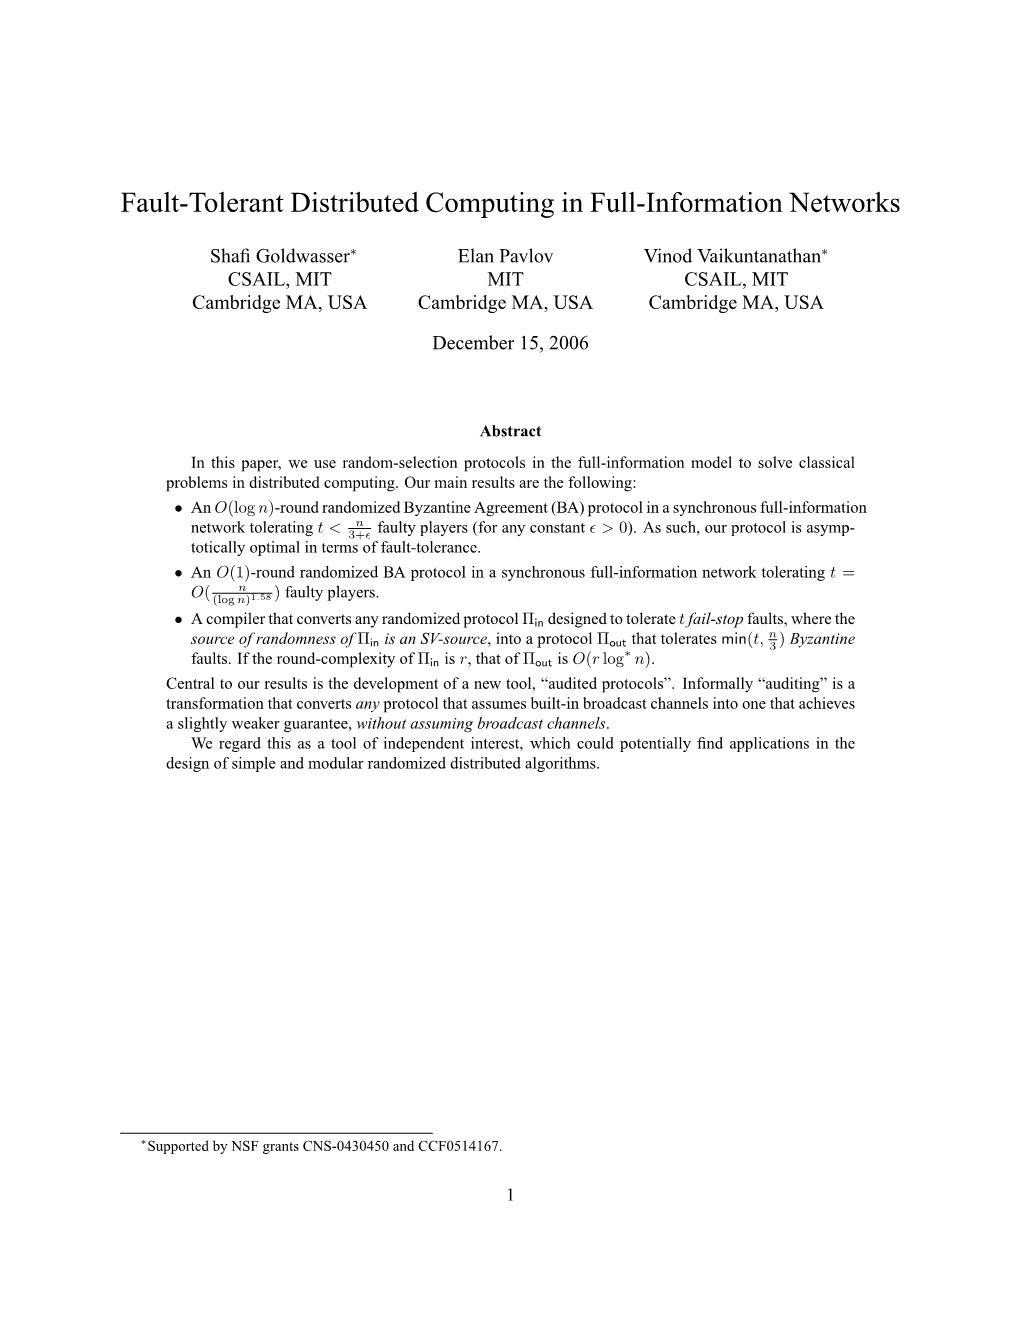 Fault-Tolerant Distributed Computing in Full-Information Networks